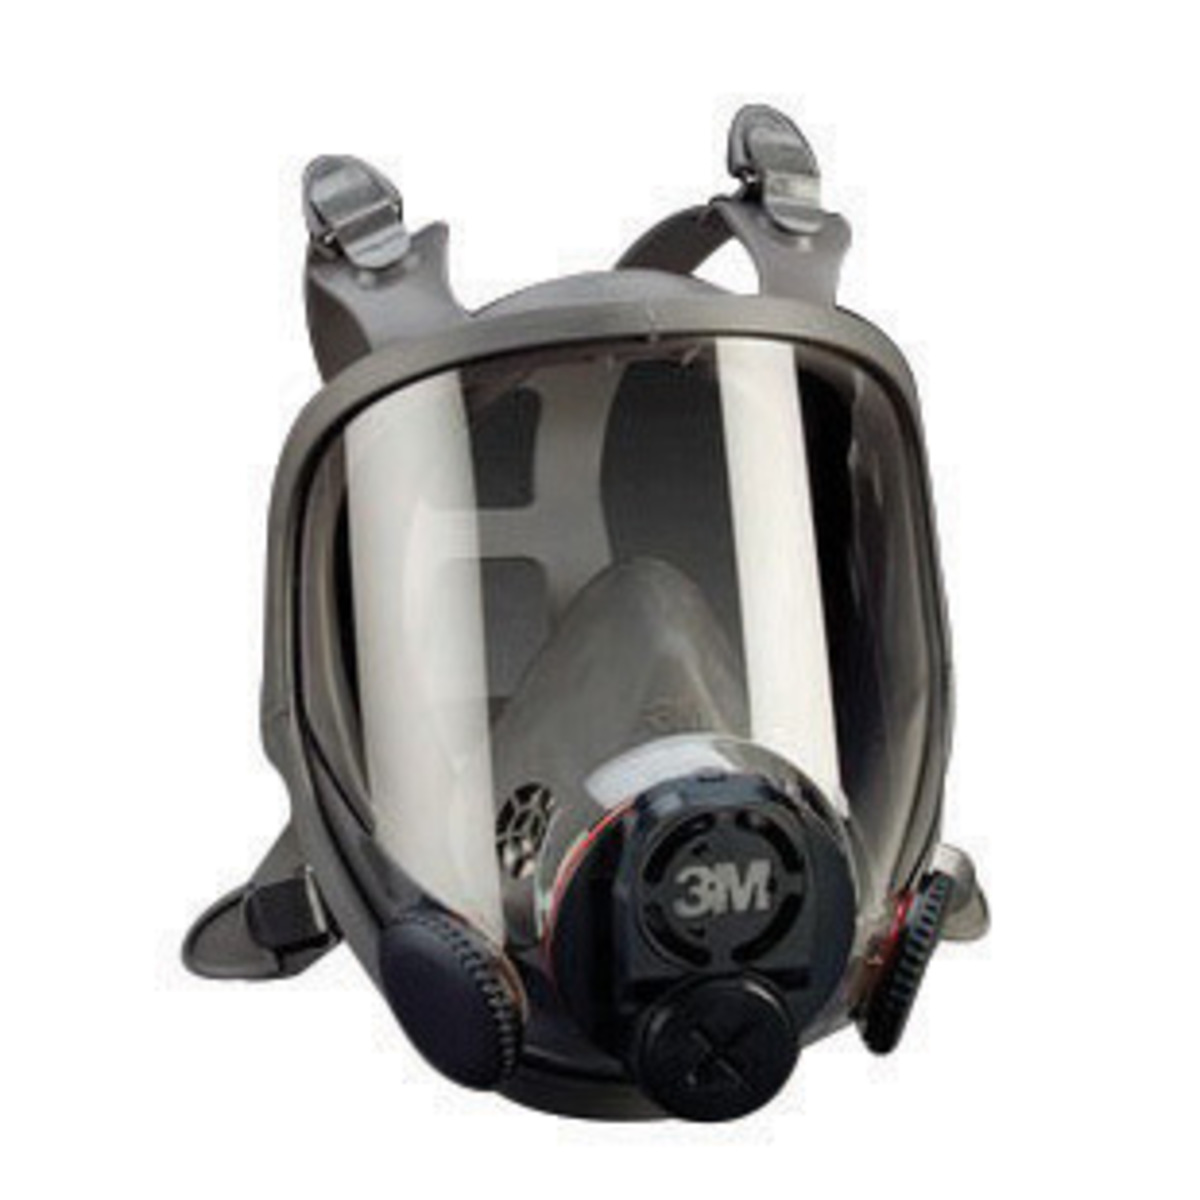 3M™ Large 6000 Series Full Face Air Purifying Respirator (Availability restrictions apply.)